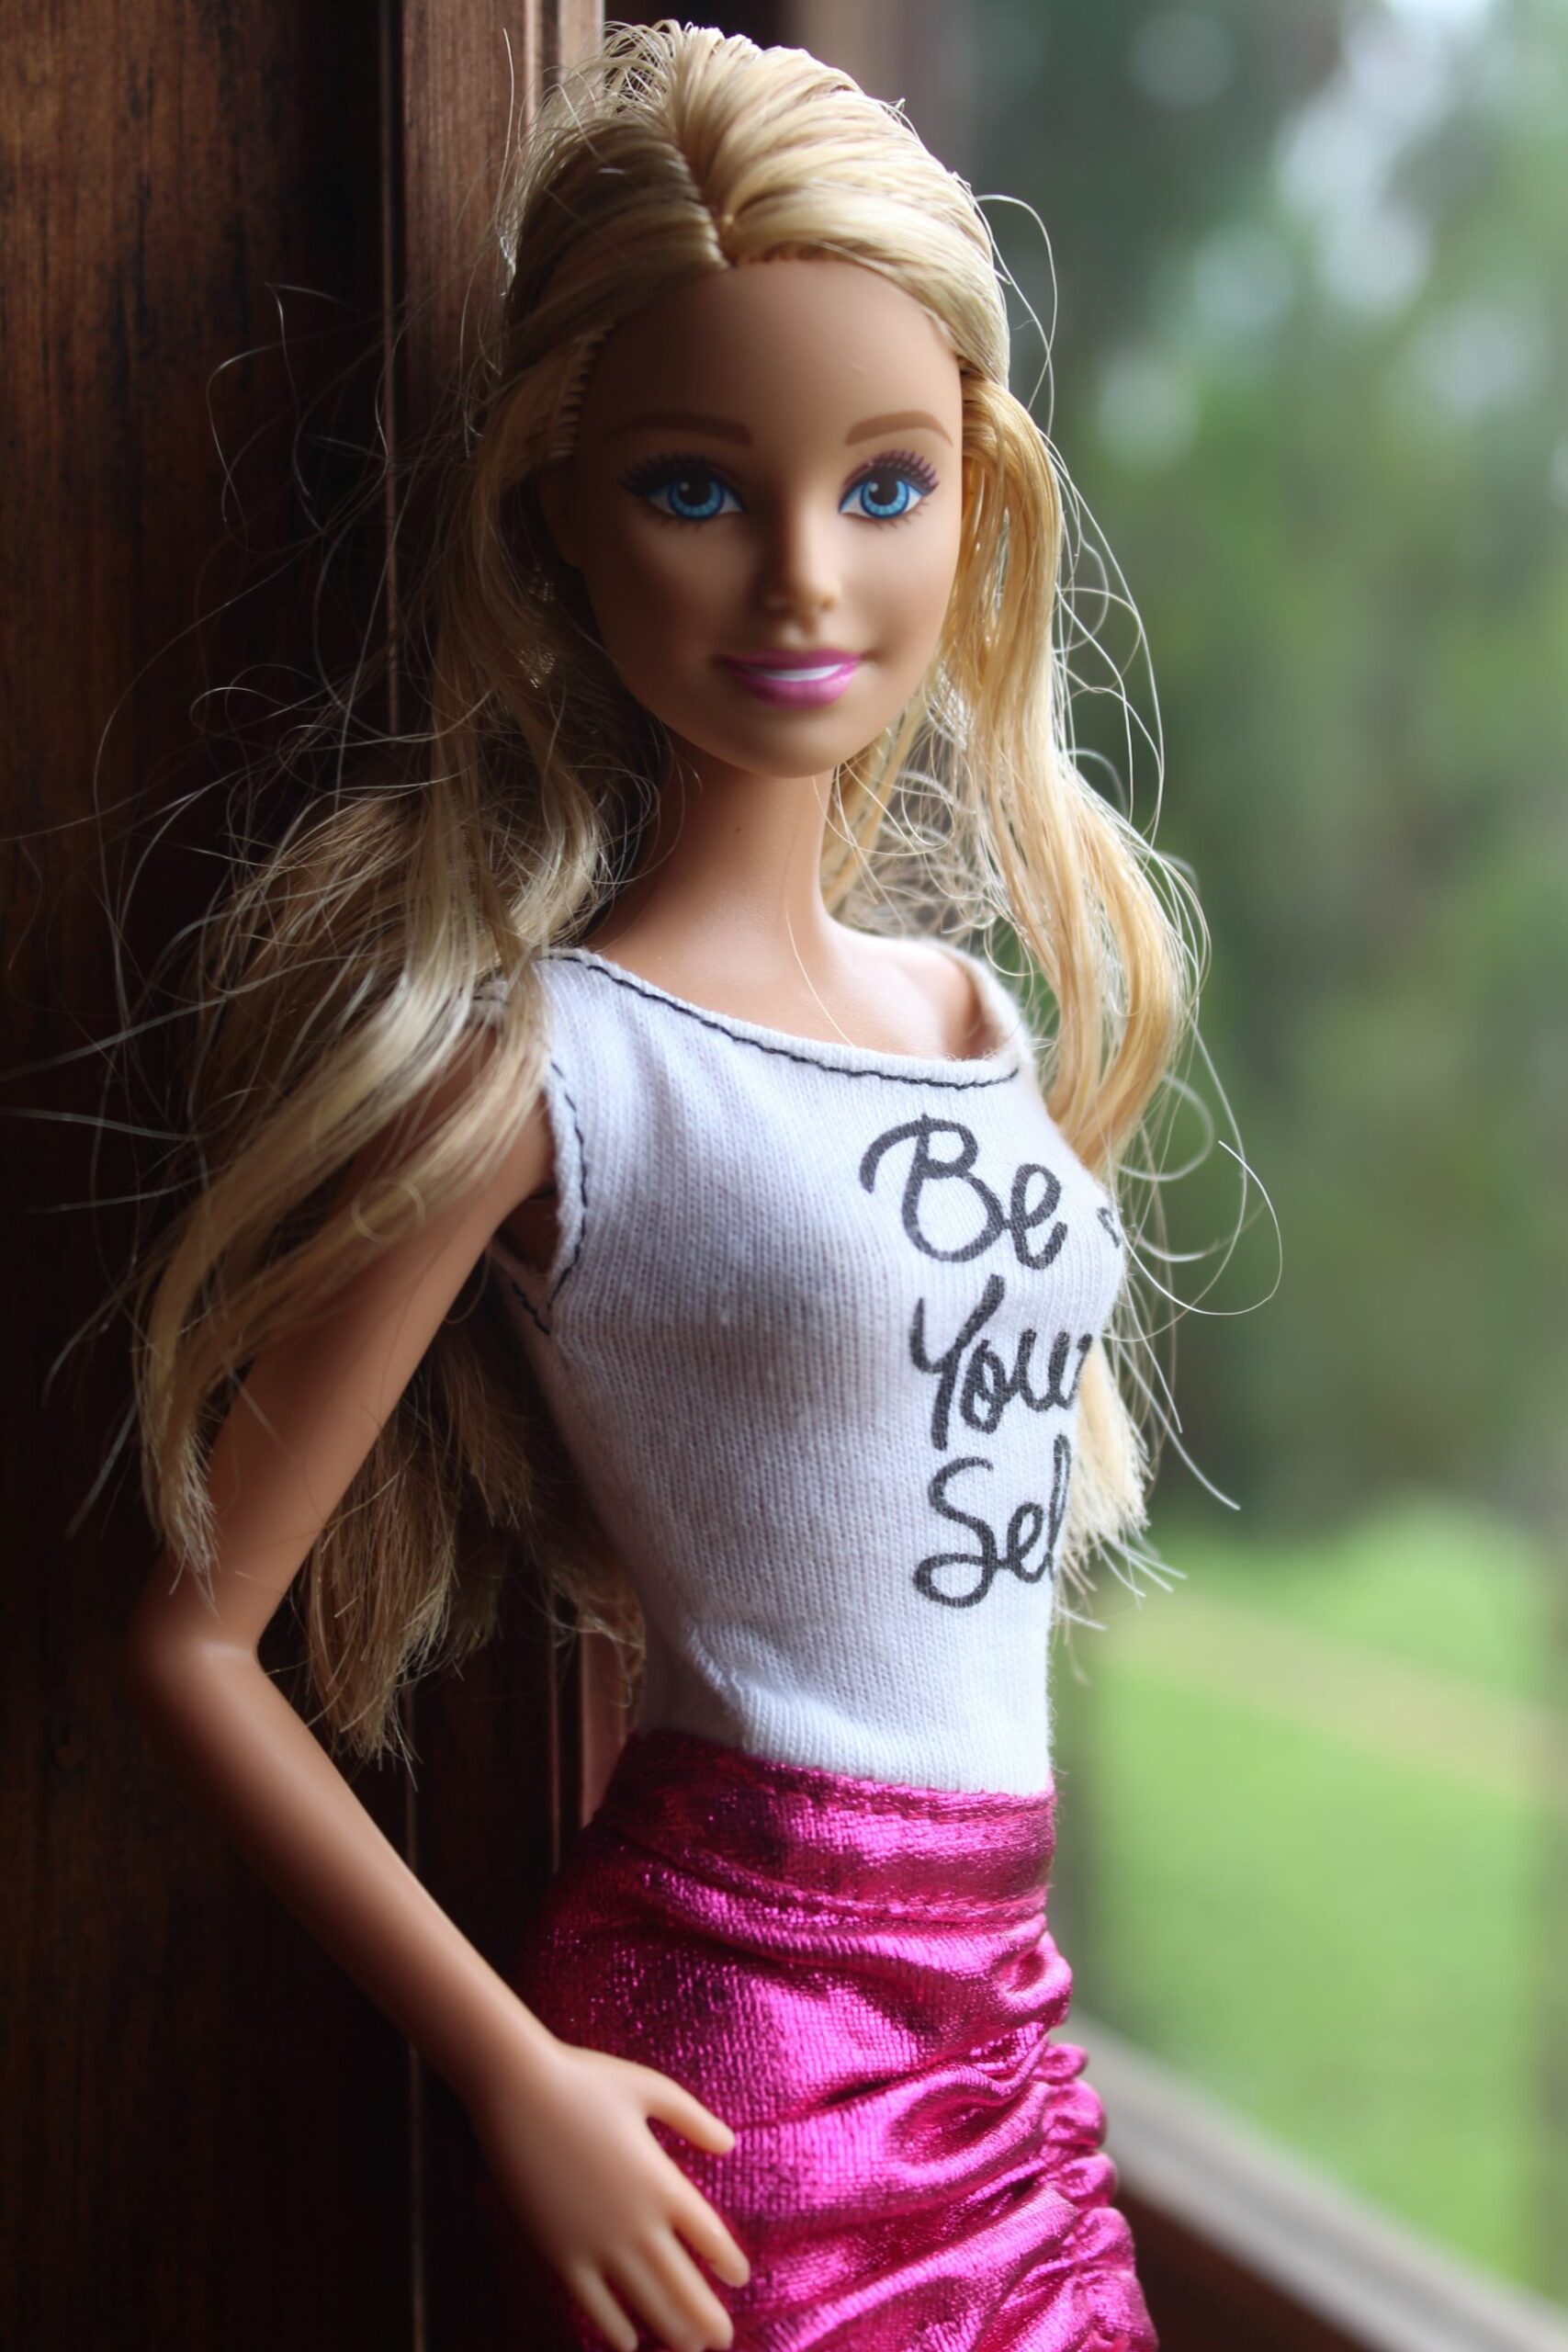 An image of a Barbie Doll for the Barbieland pool party at the Godfrey Hotel.